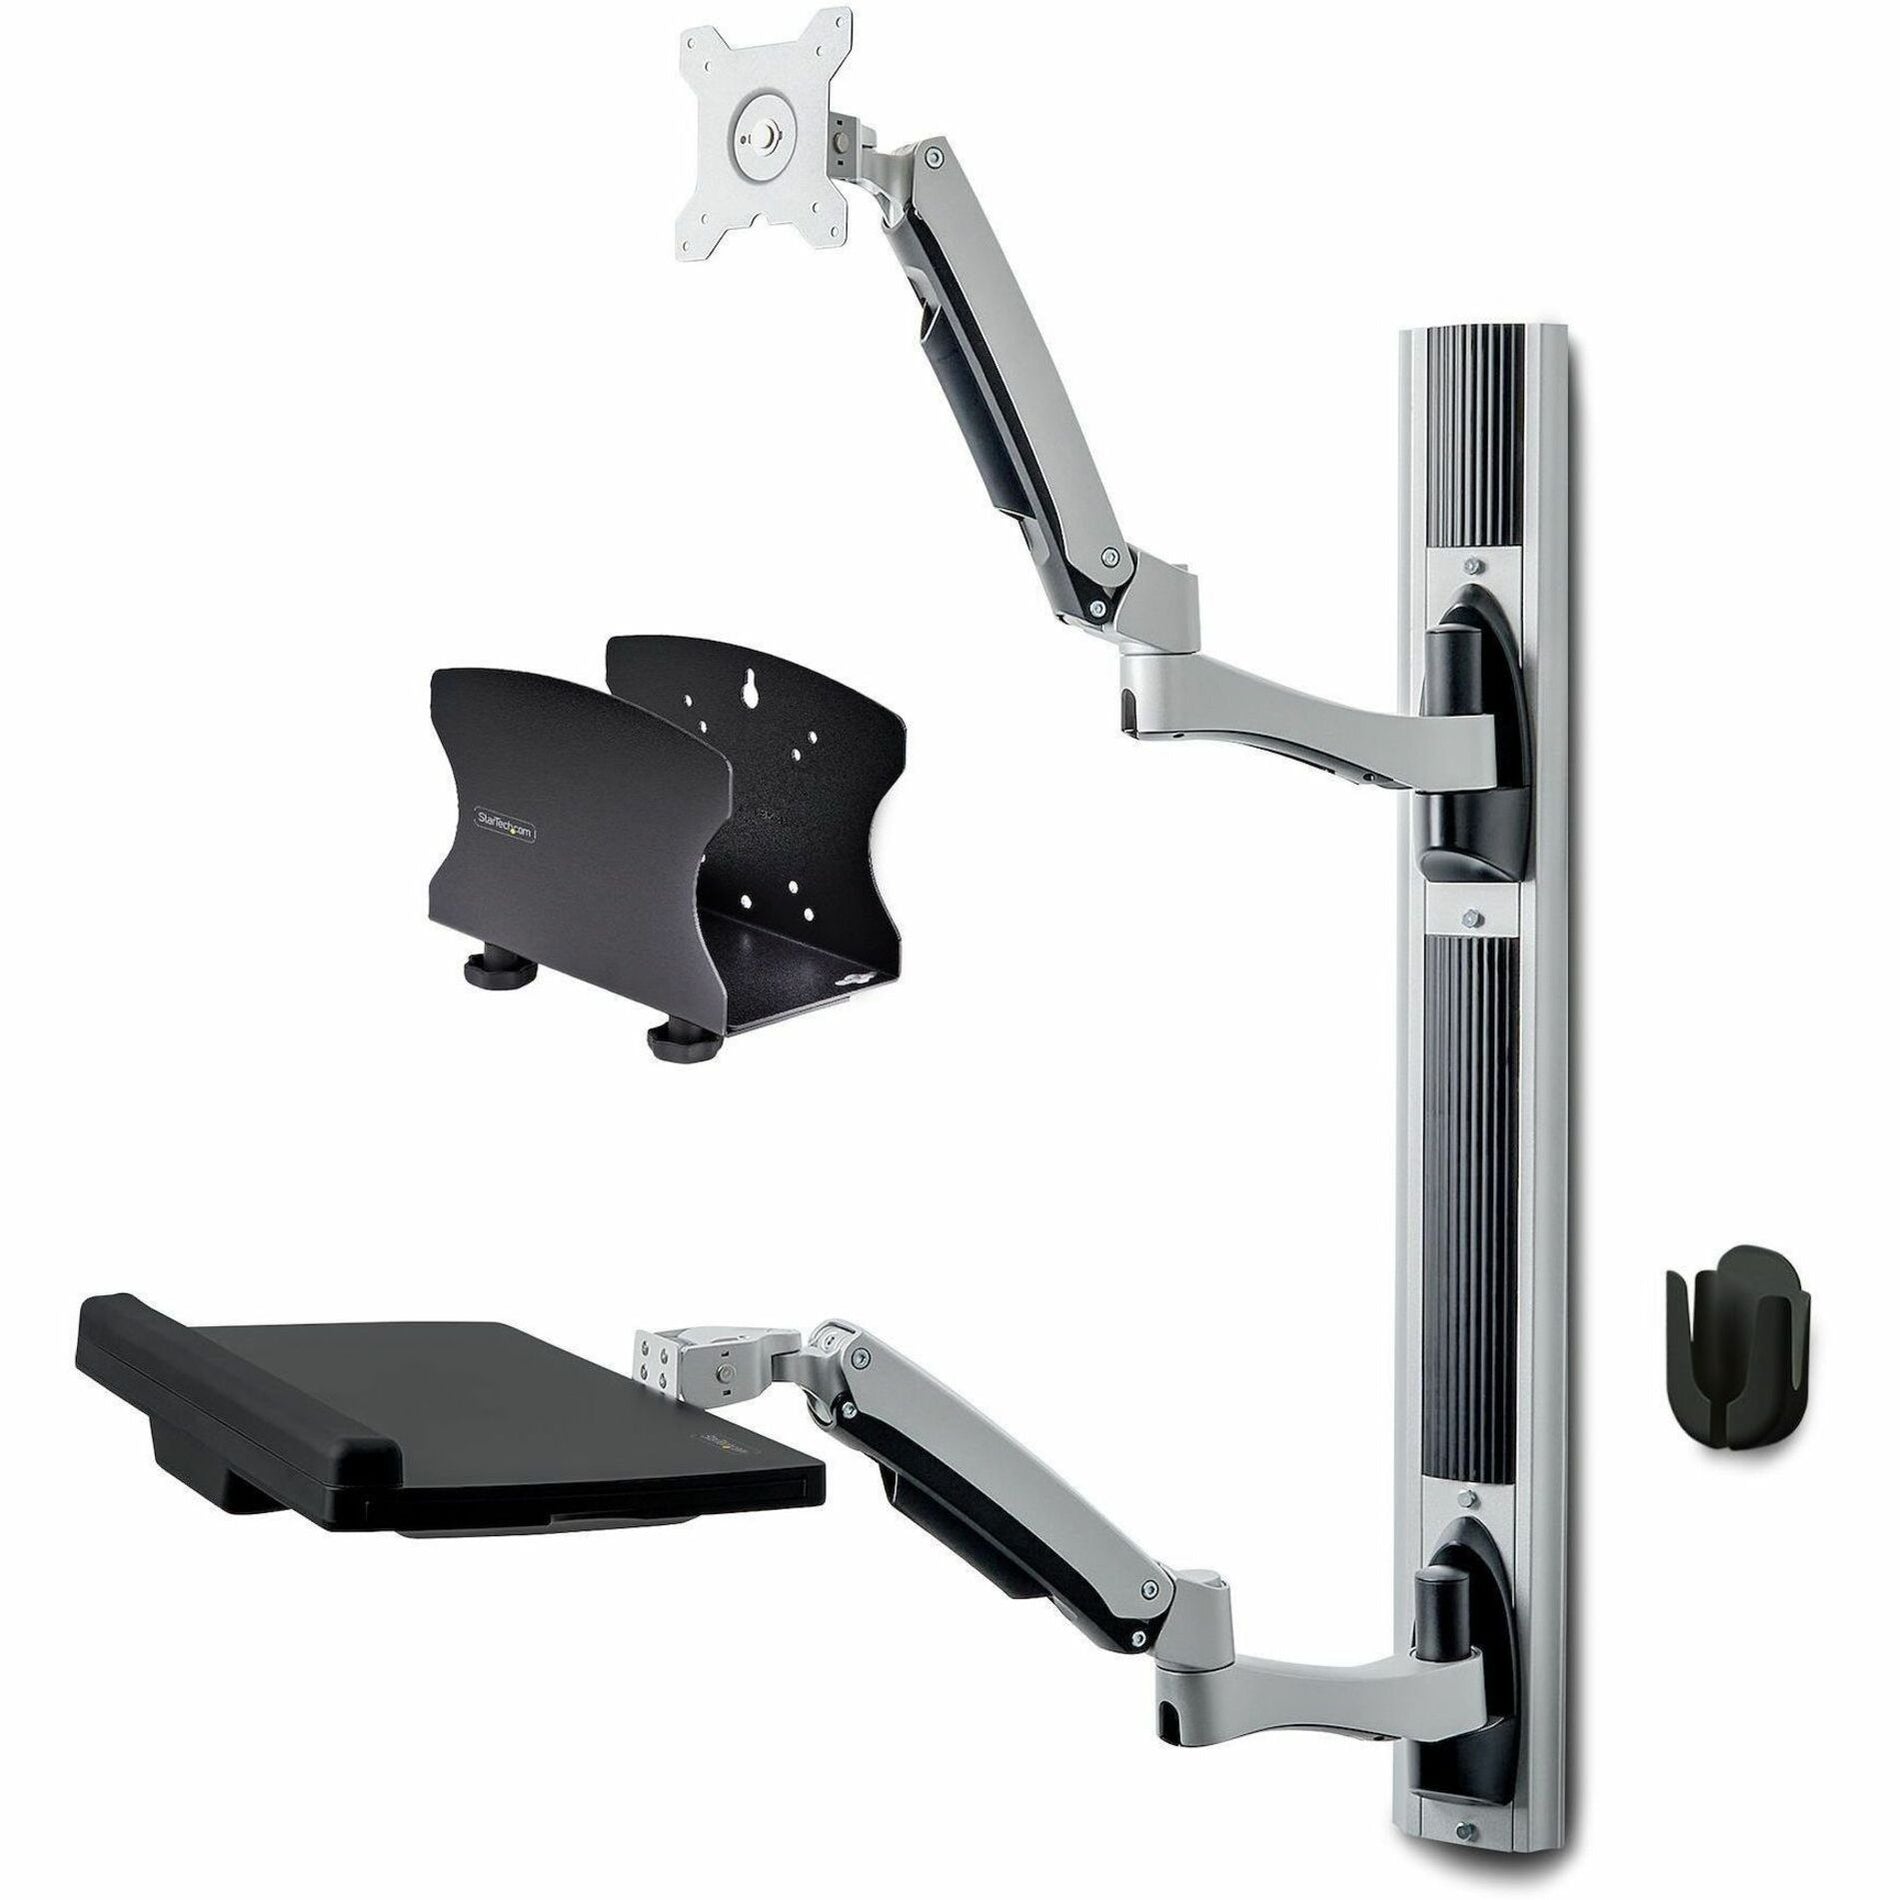 StarTech.com 2PASTSC-WALL-MOUNT Wall Mount, 360° Rotation, Adjustable Arm, Cable Management, Keyboard Tray, 22 lb Maximum Load Capacity